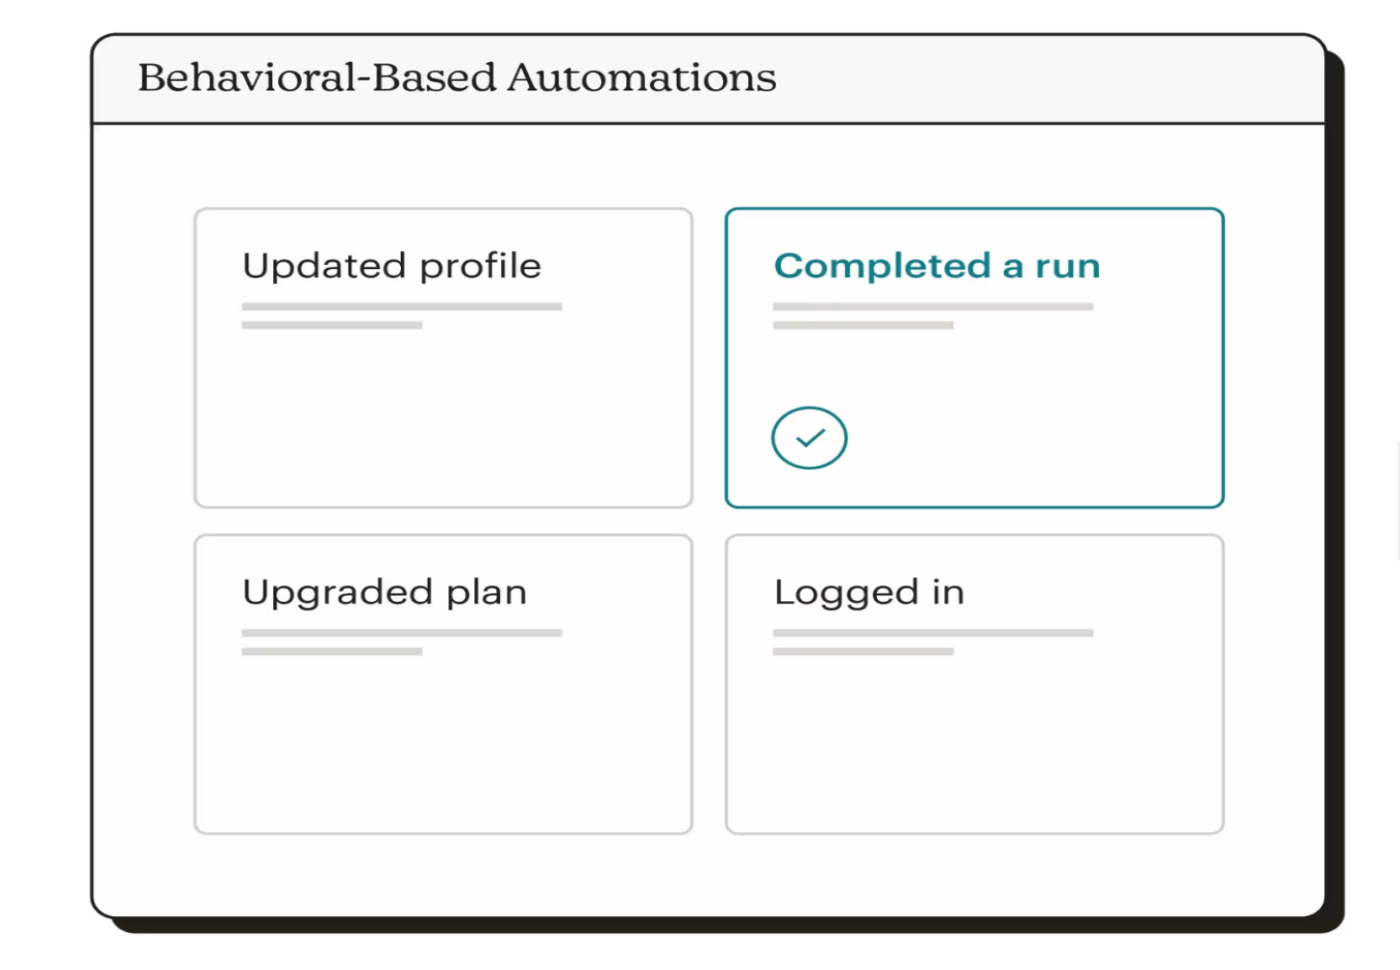 Mailchimp behavioral-based automations page.